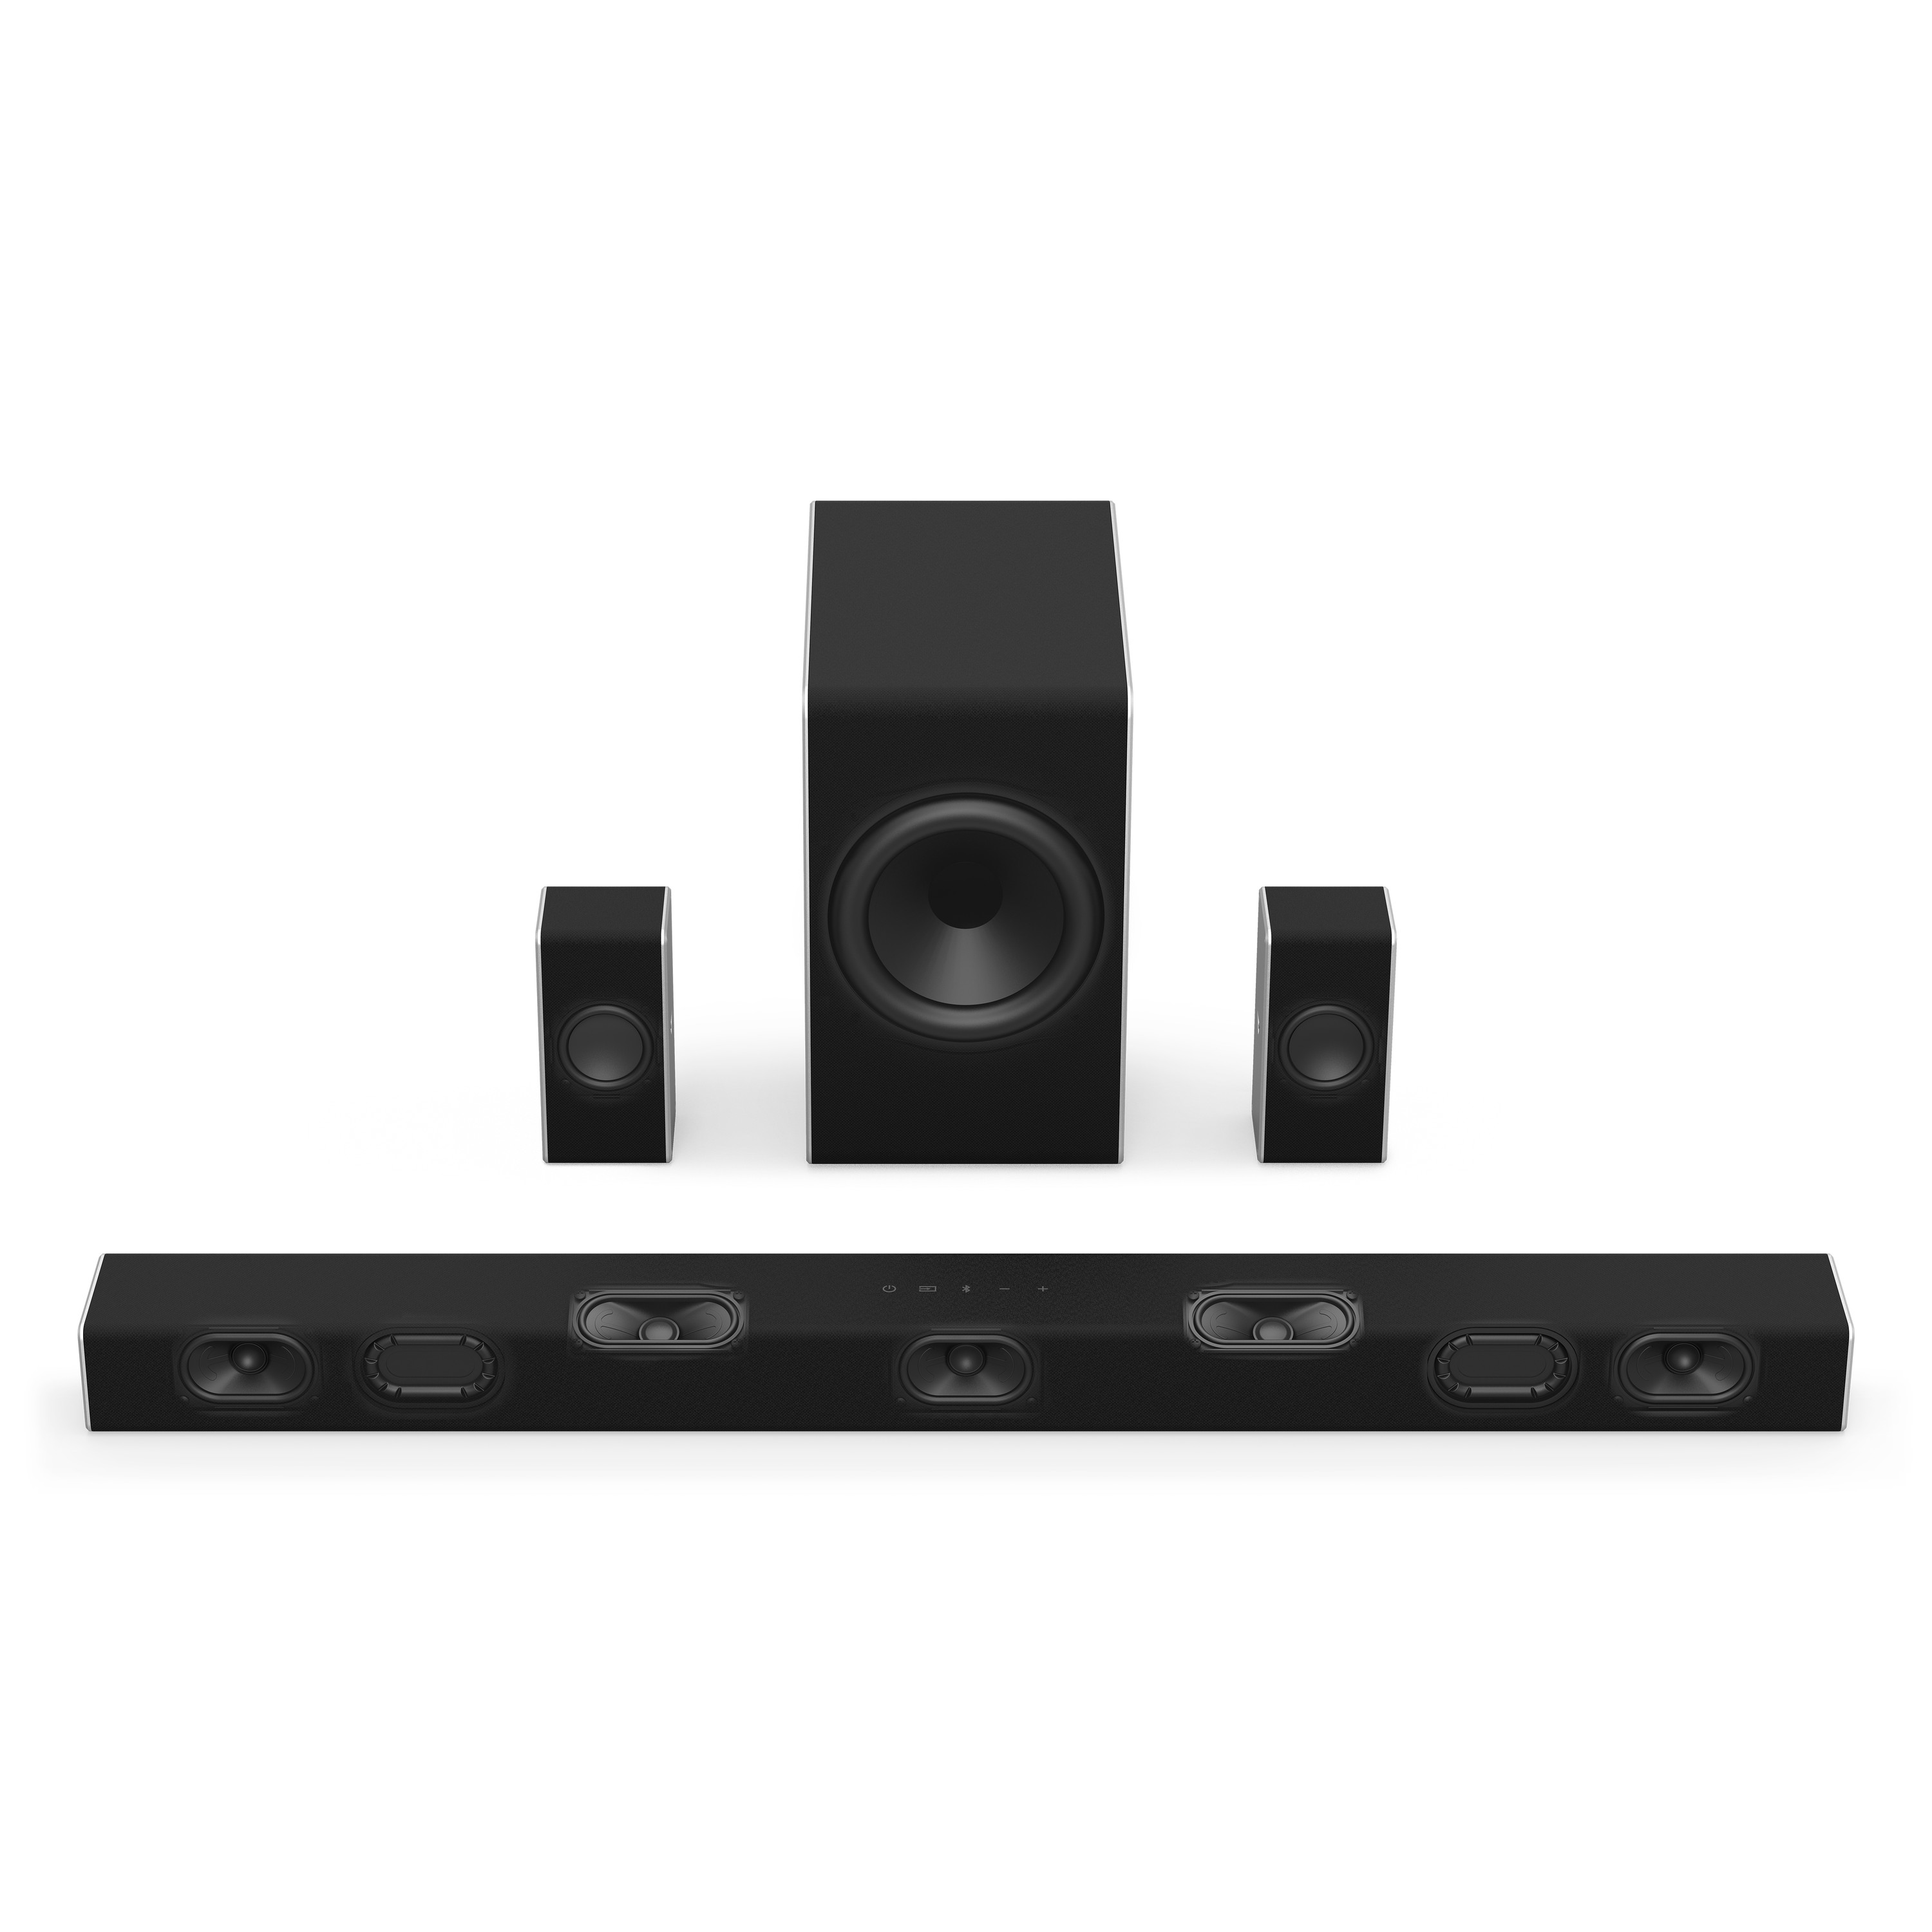 VIZIO 36" 5.1.2 Home Theater Sound System with Dolby Atmos - SB36512-F6 - image 3 of 22